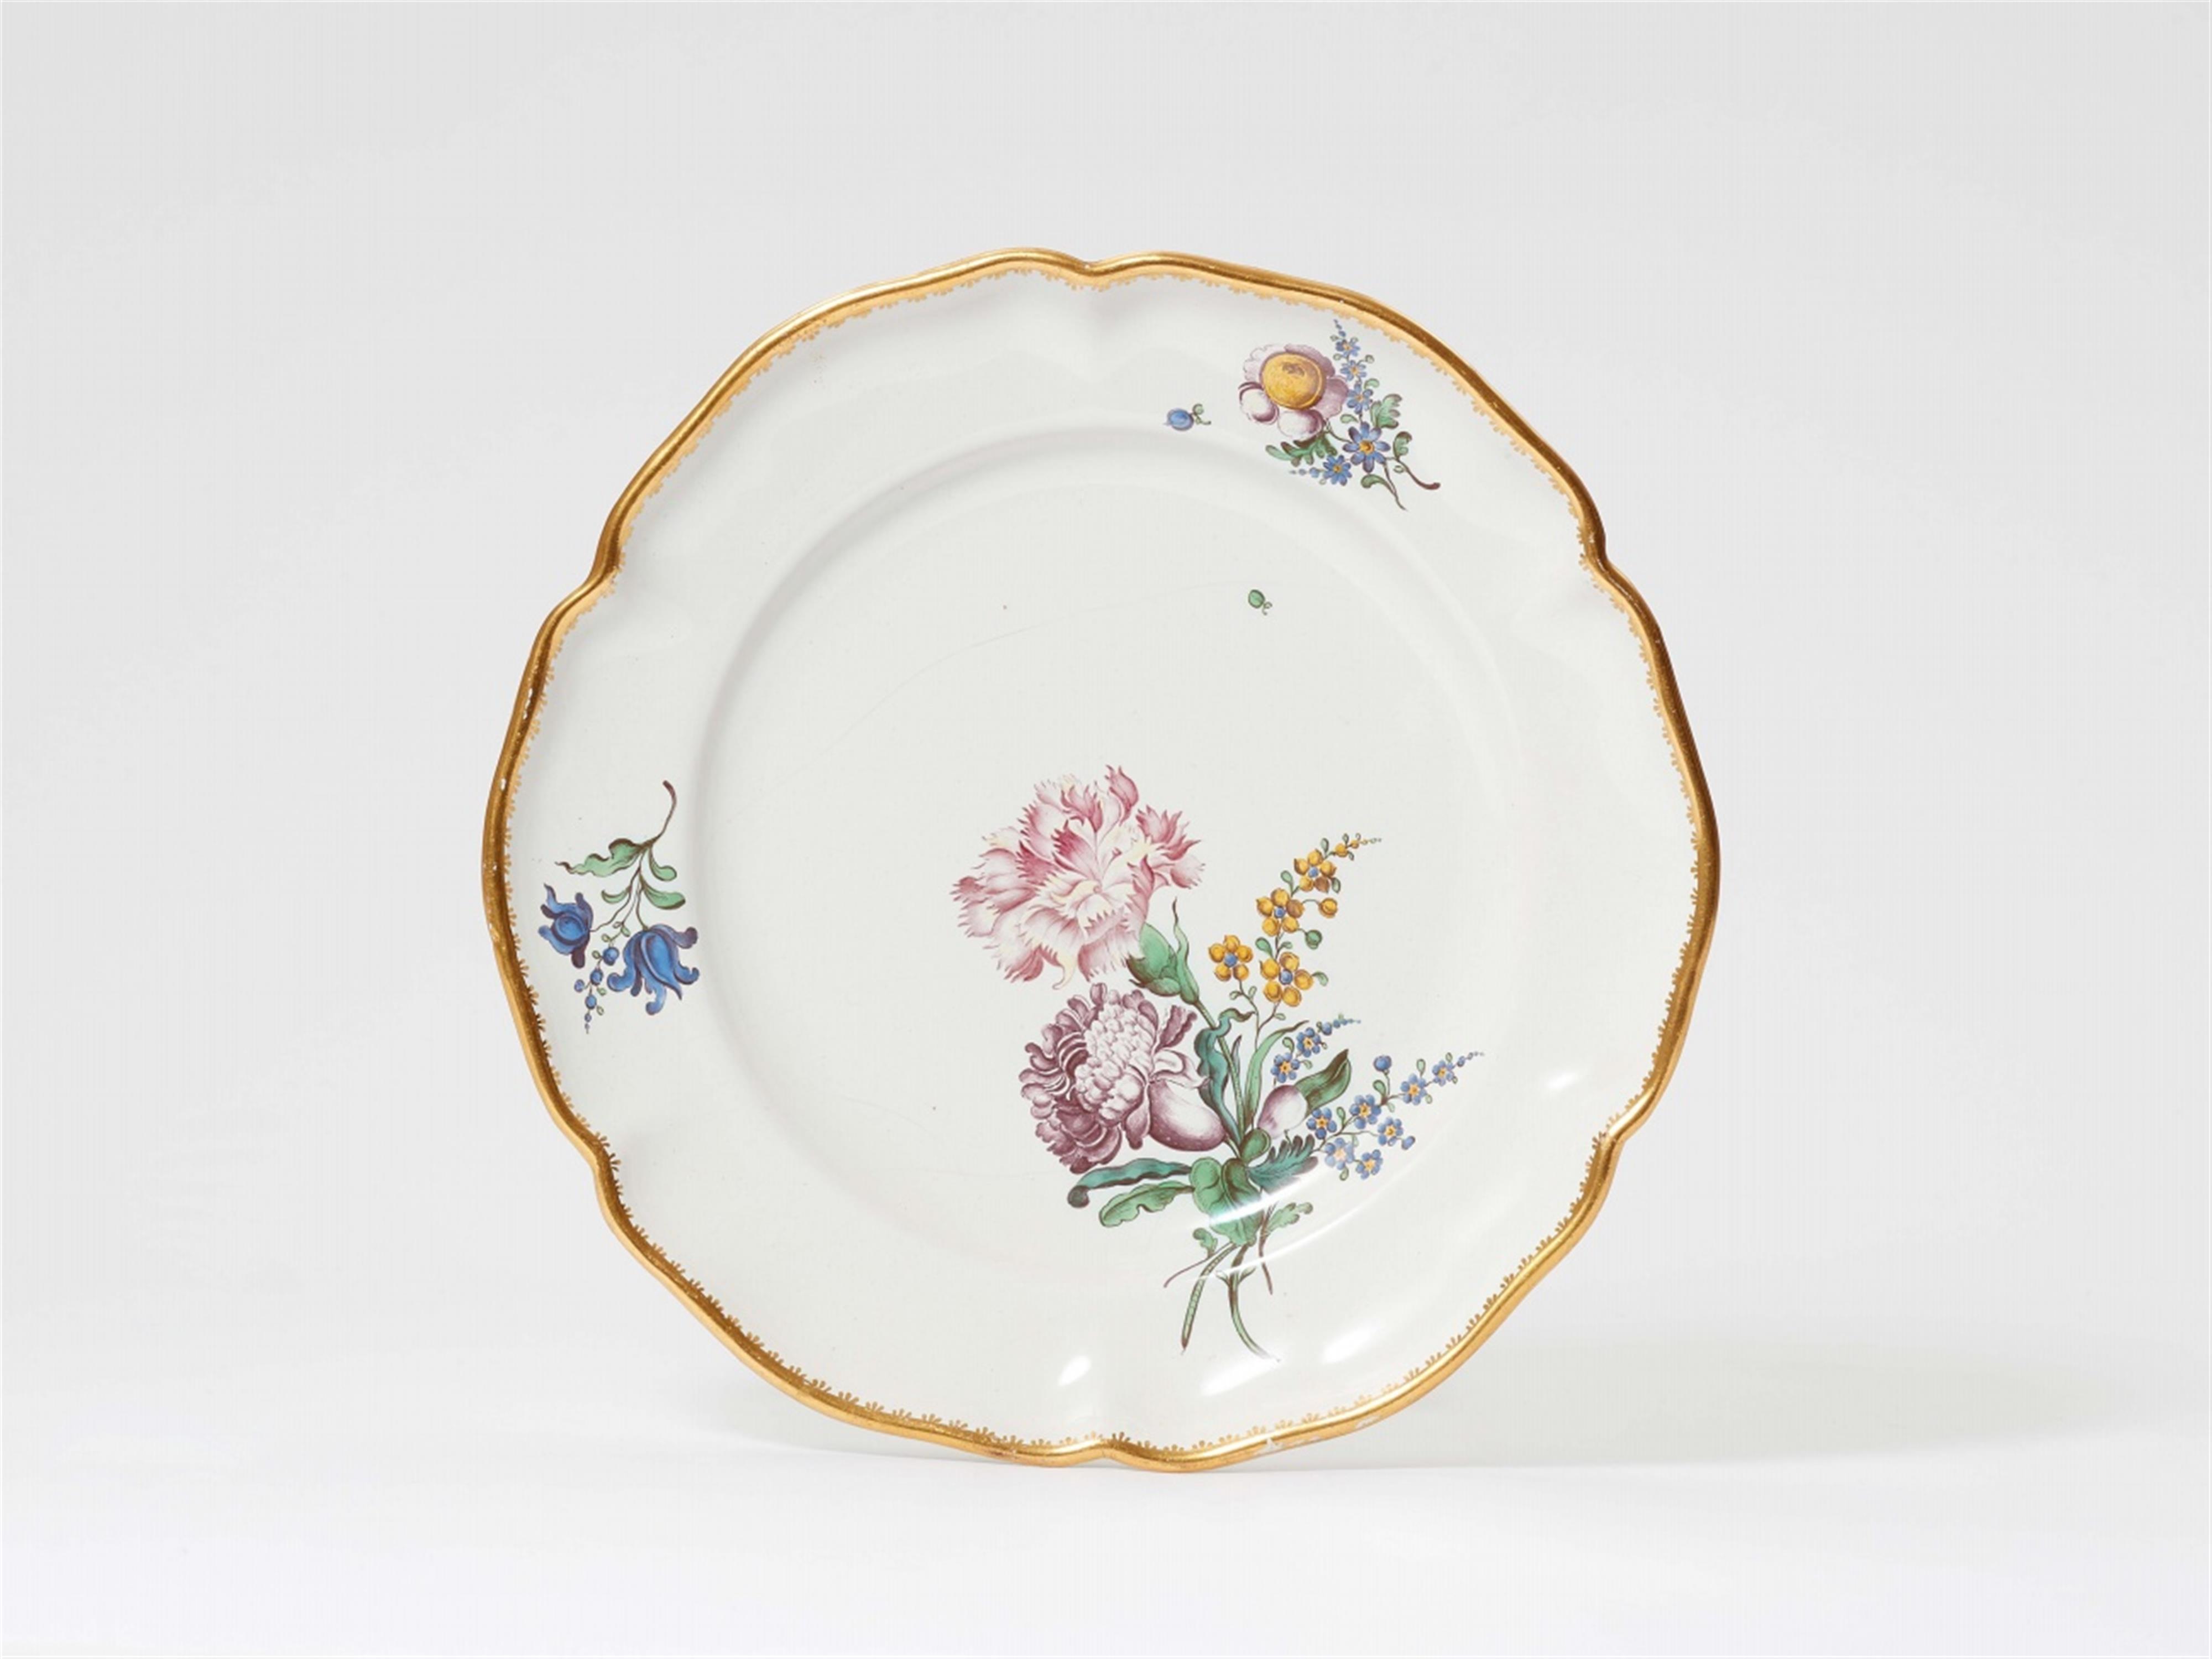 A Strasbourg faience plate with floral decor - image-1